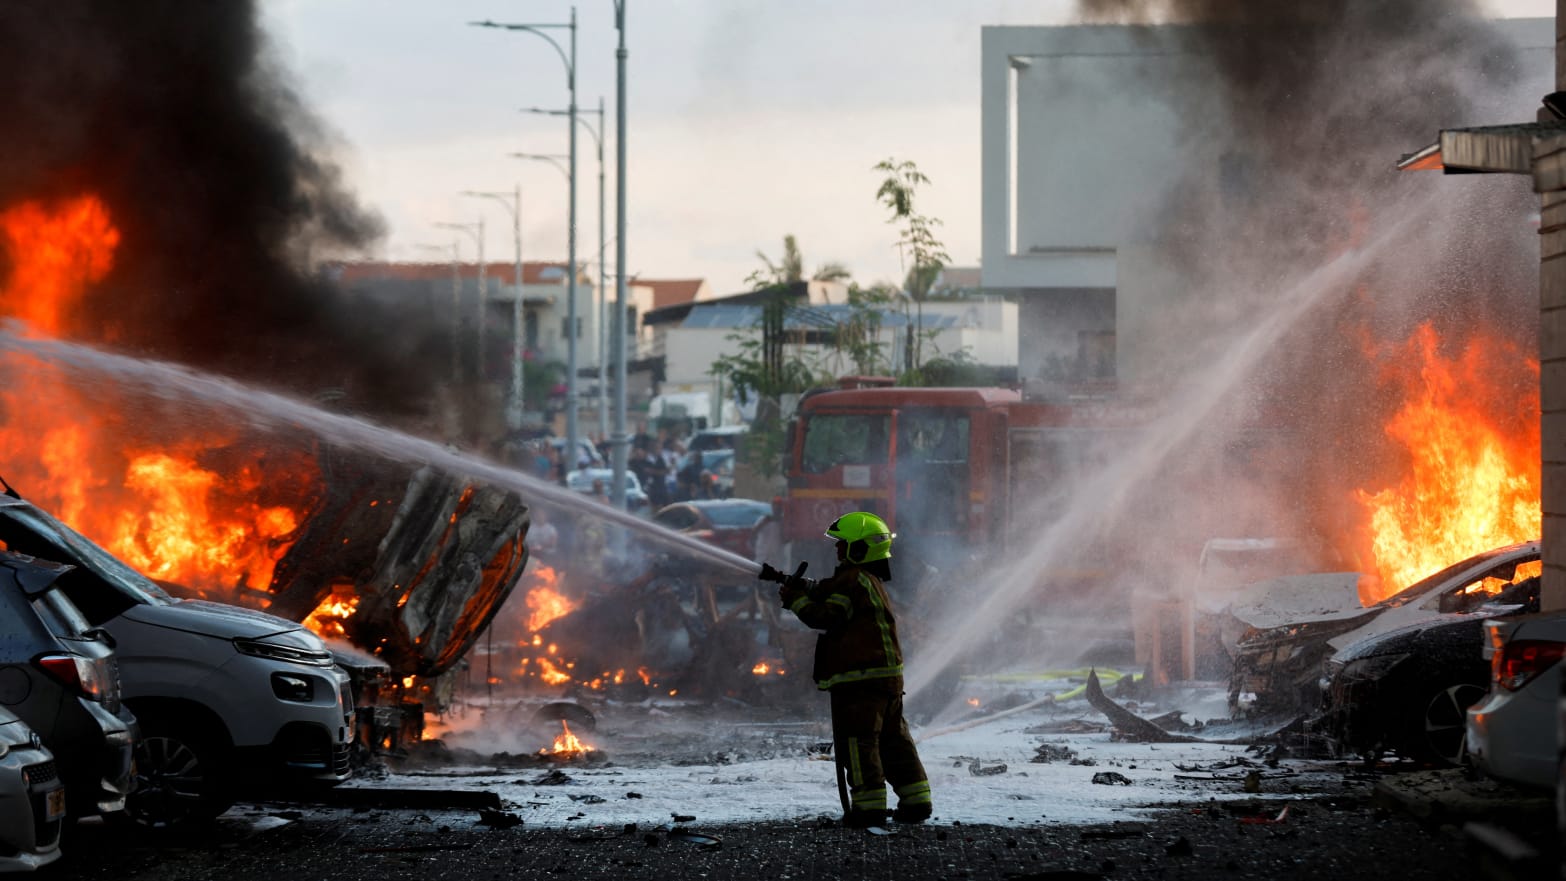 An emergency personnel works to extinguish the fire after rockets are launched from the Gaza Strip, as seen from the city of Ashkelon, Israel